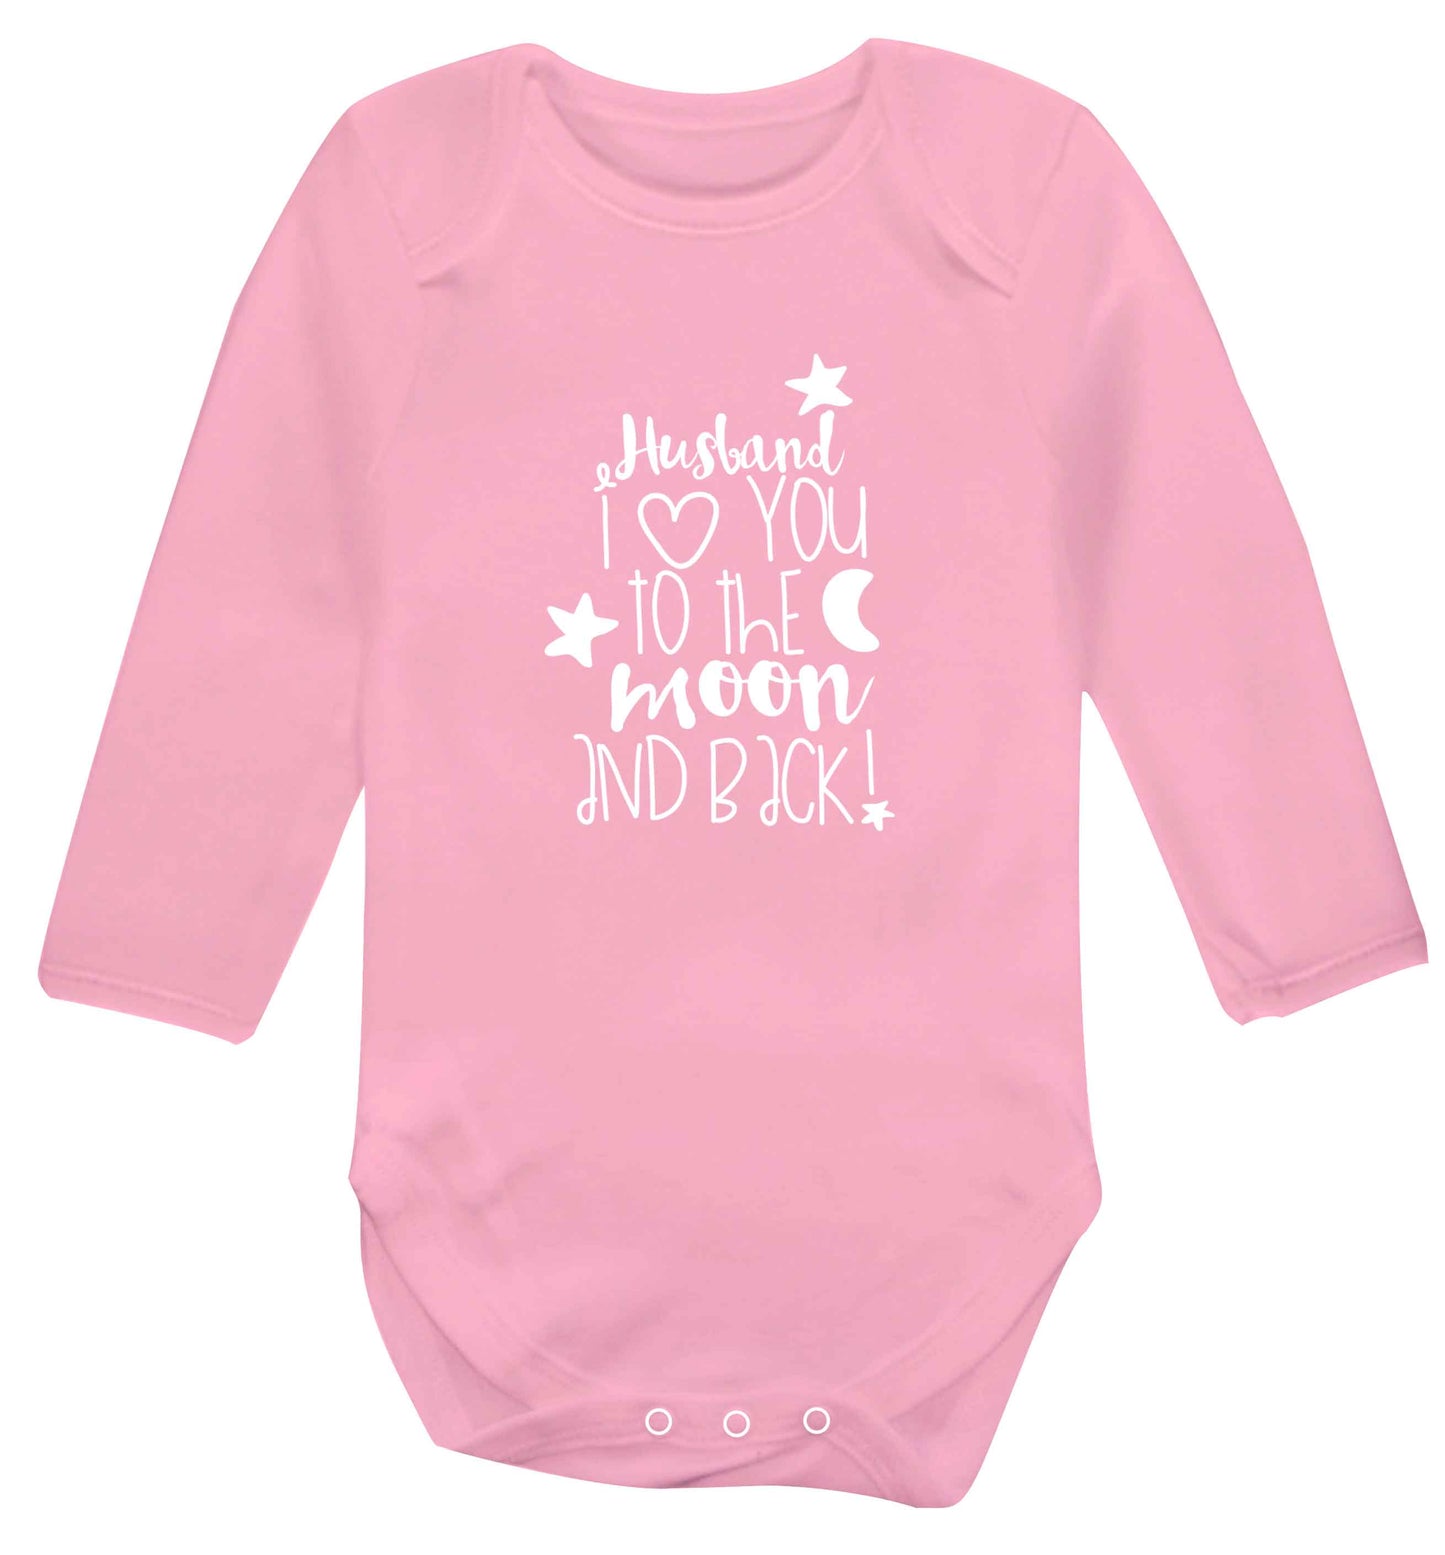 Husband I love you to the moon and back baby vest long sleeved pale pink 6-12 months